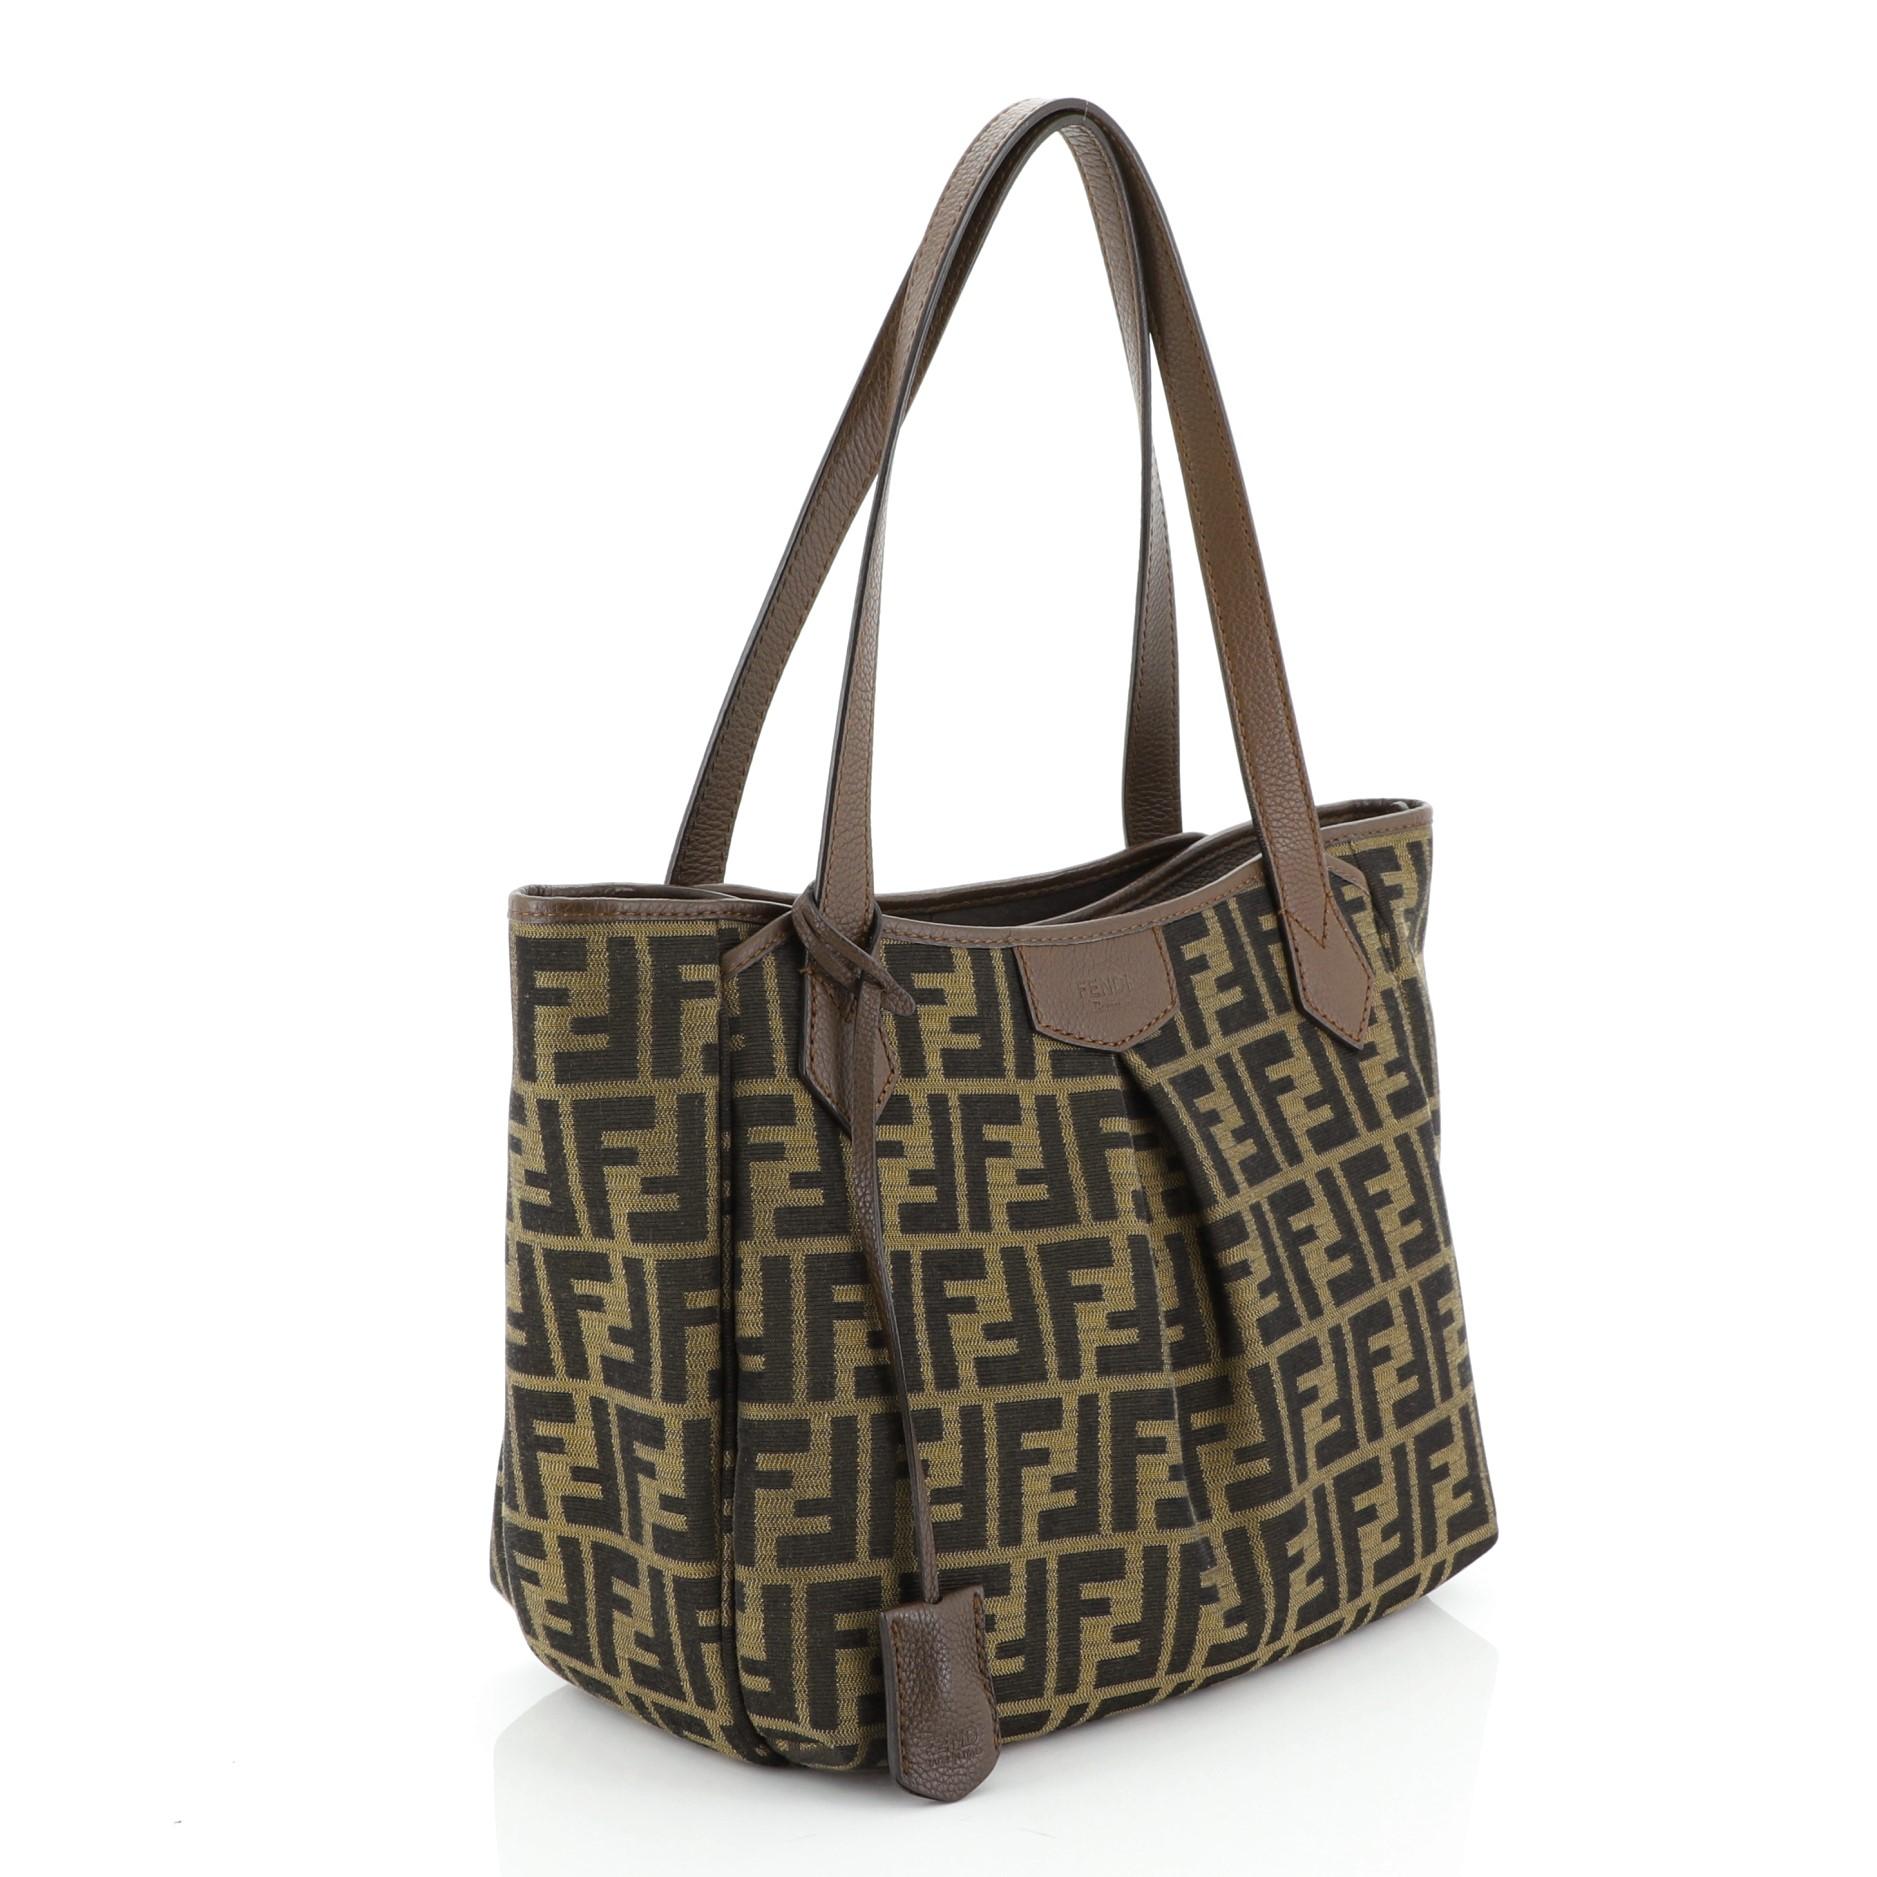 This Fendi Shopping Tote Zucca Canvas Medium, crafted in brown zucca canvas, features dual handles, leather trim, and gold-tone hardware. Its zip closure opens to a brown striped fabric interior with slip pockets. 

Estimated Retail Price: